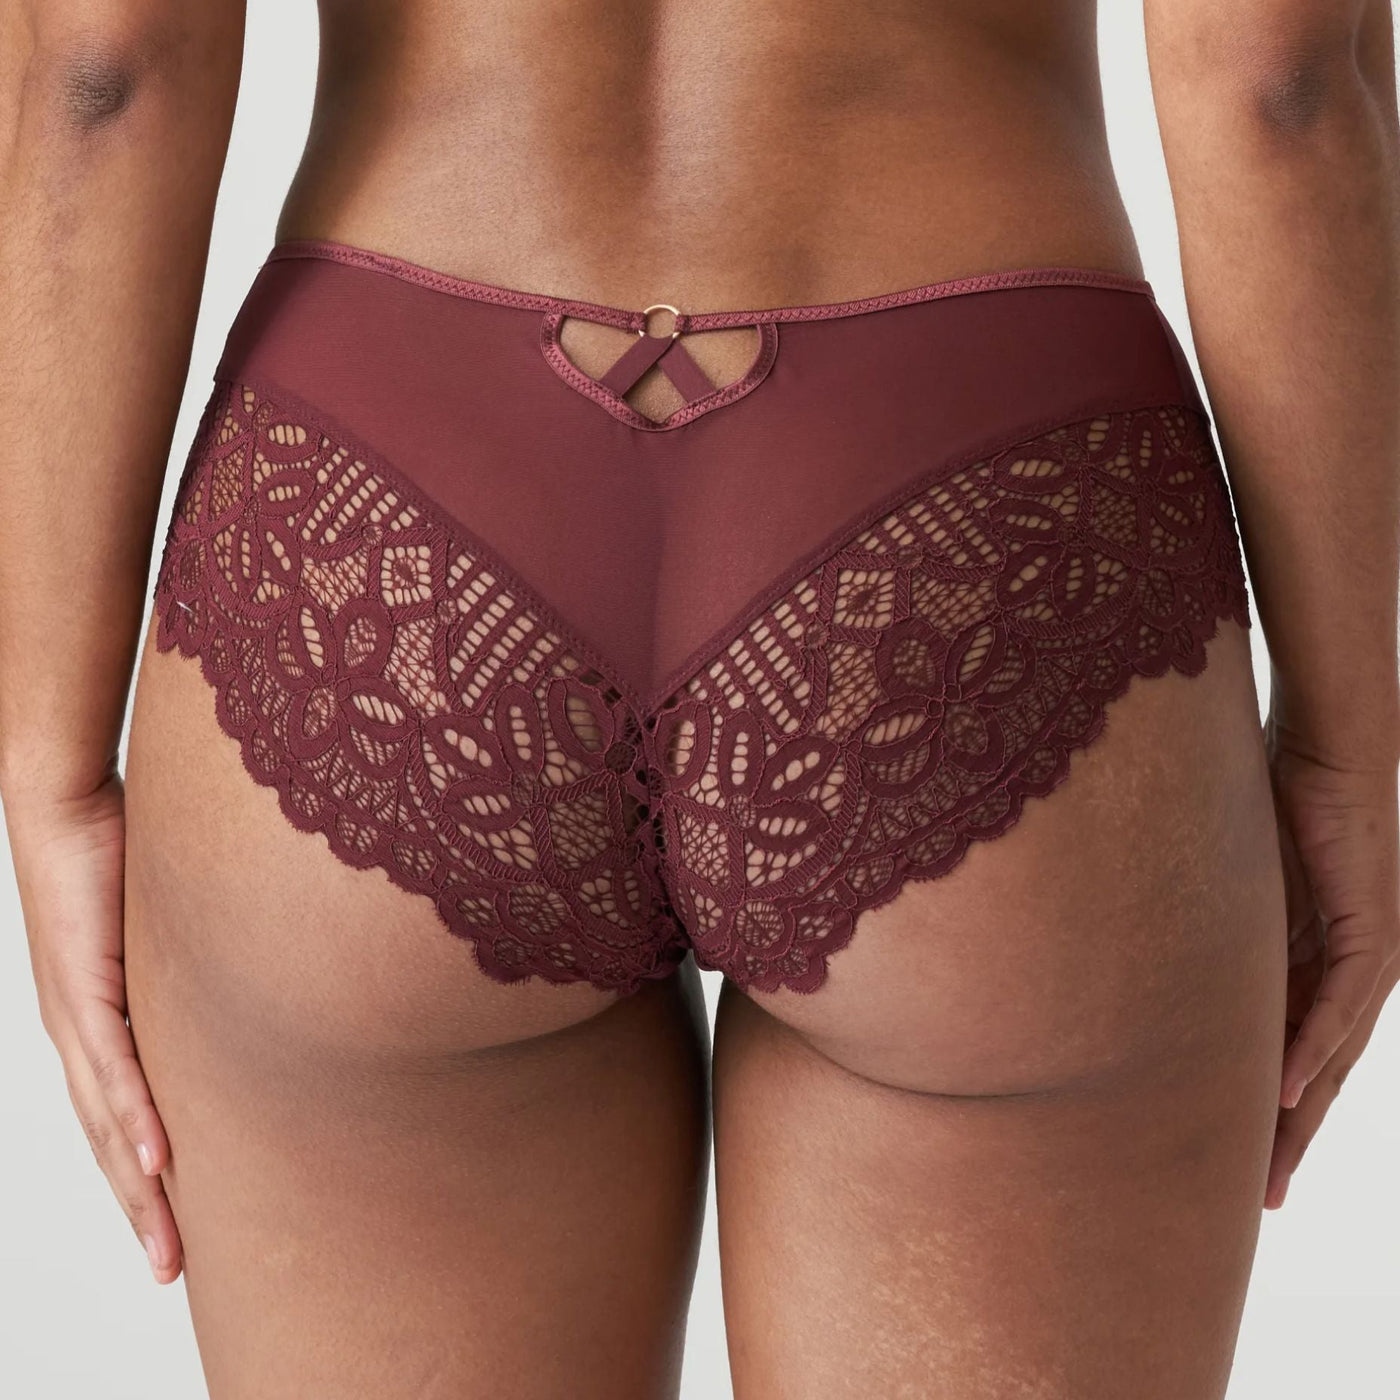 Prima Donna Twist First Night Hot Pant in Merlot 0541882-Panties-Prima Donna-Merlot-Medium-Anna Bella Fine Lingerie, Reveal Your Most Gorgeous Self!